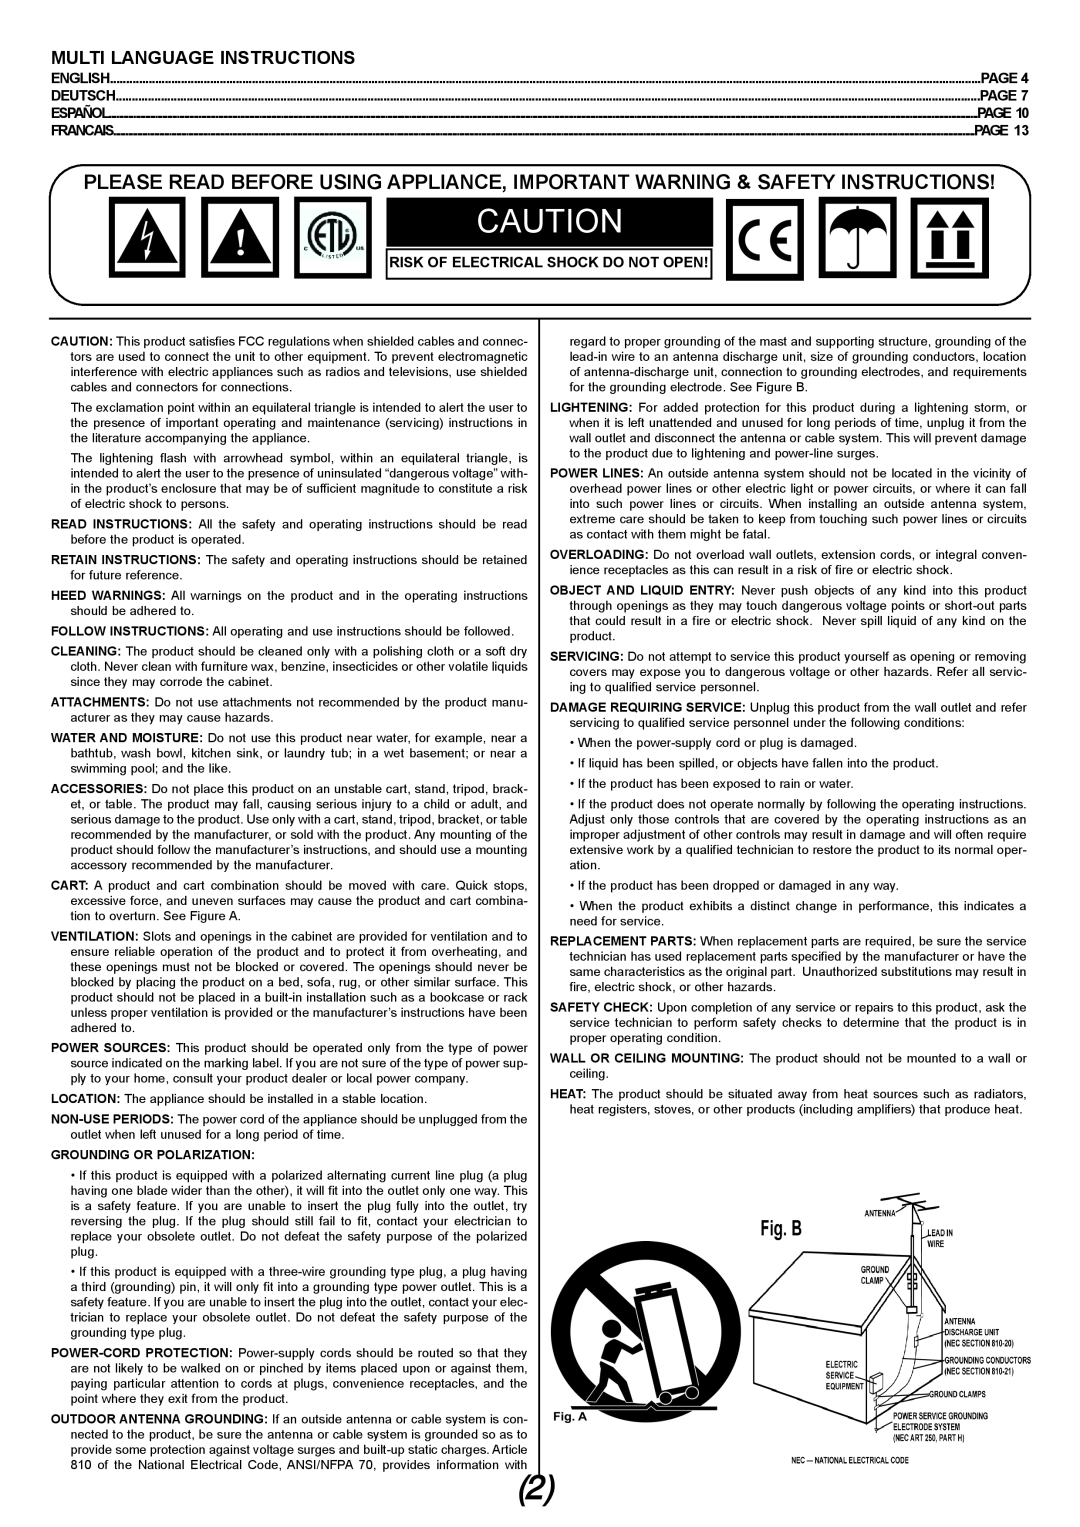 Gemini CFX-30 manual Multi Language Instructions, Page, Risk Of Electrical Shock Do Not Open, Grounding Or Polarization 